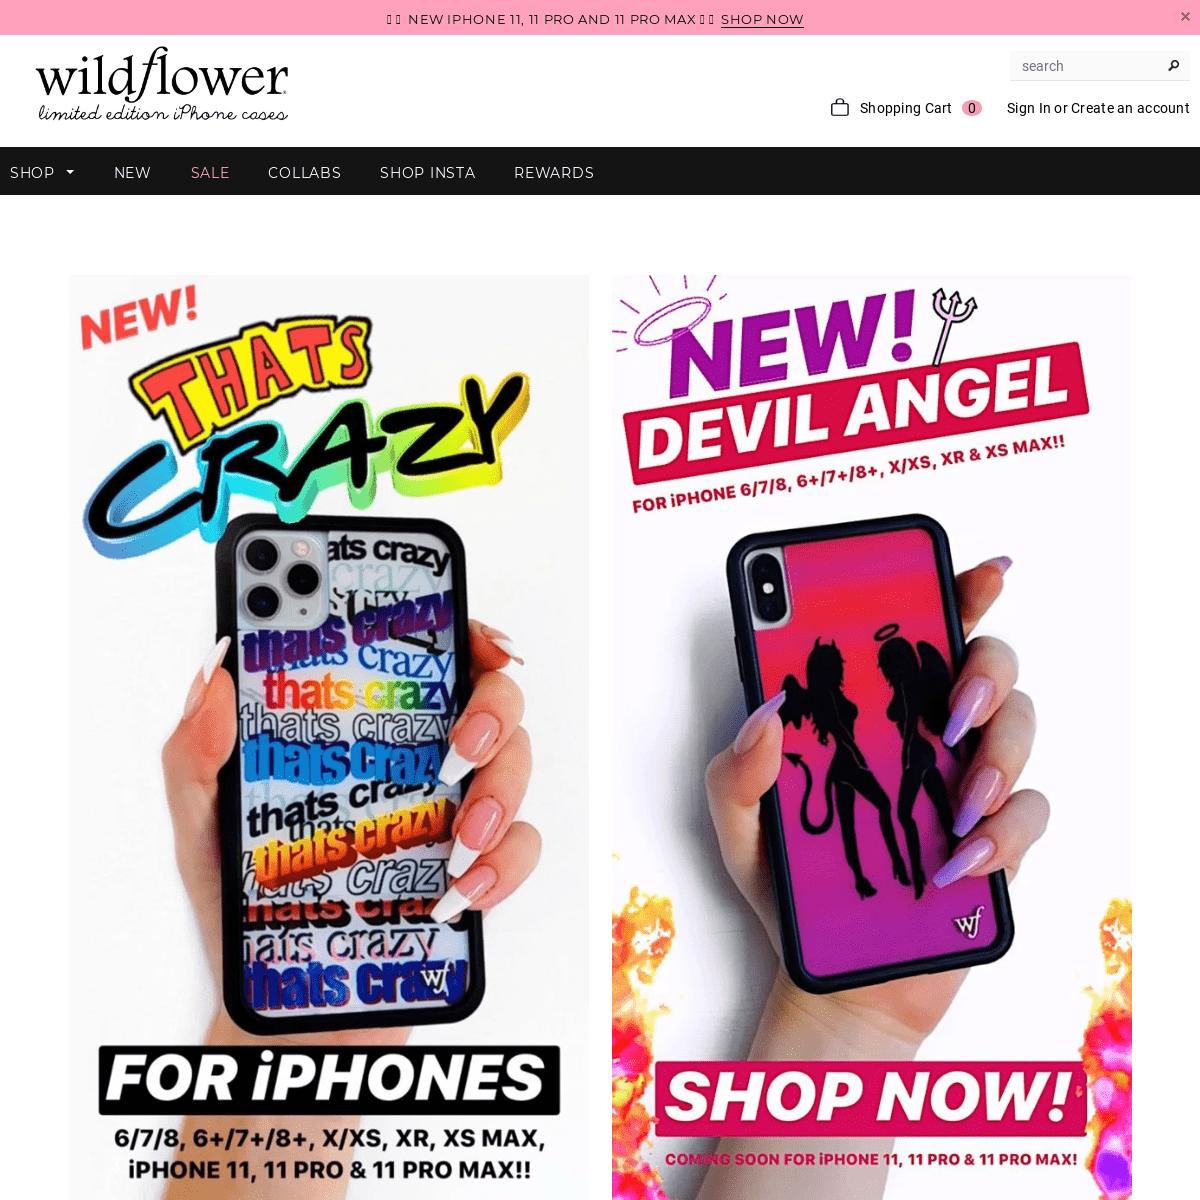 A complete backup of wildflowercases.com